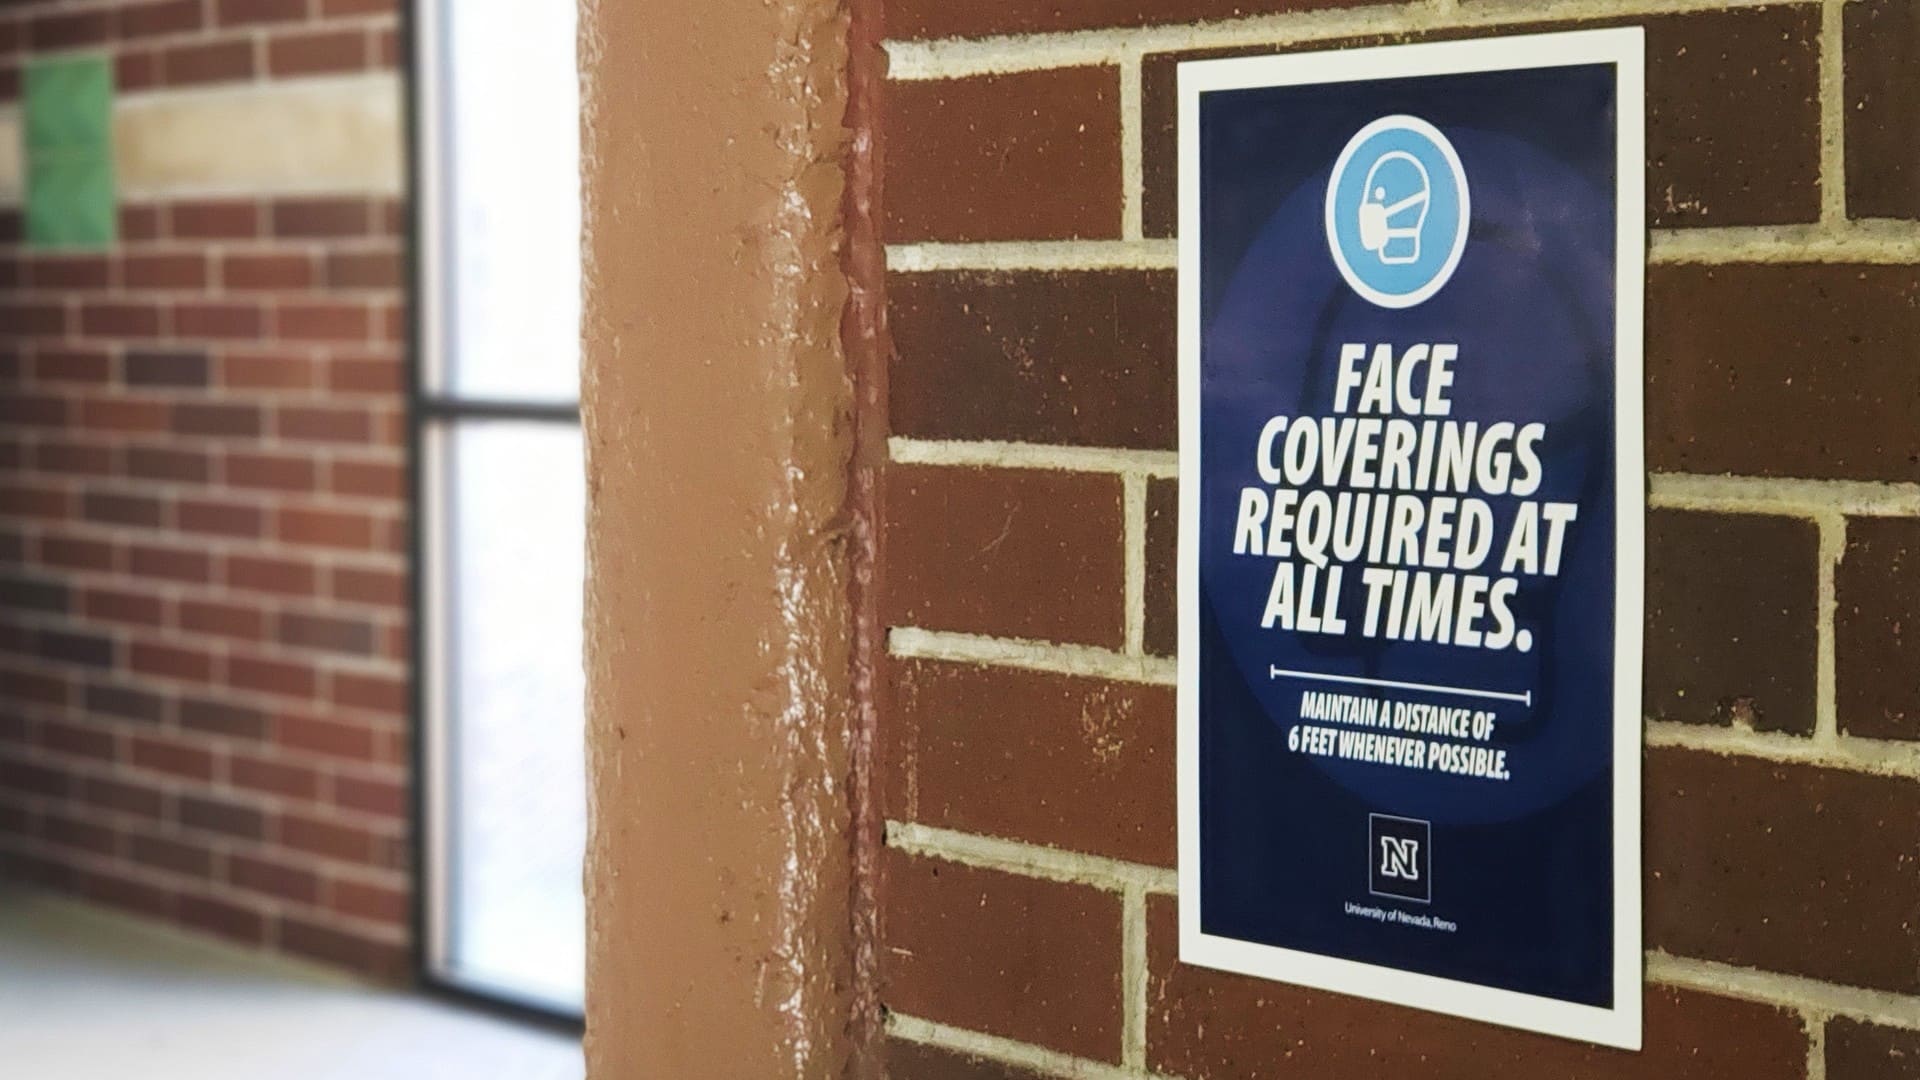 A poster indicating that face coverings are required at all times on the wall of a parking garage